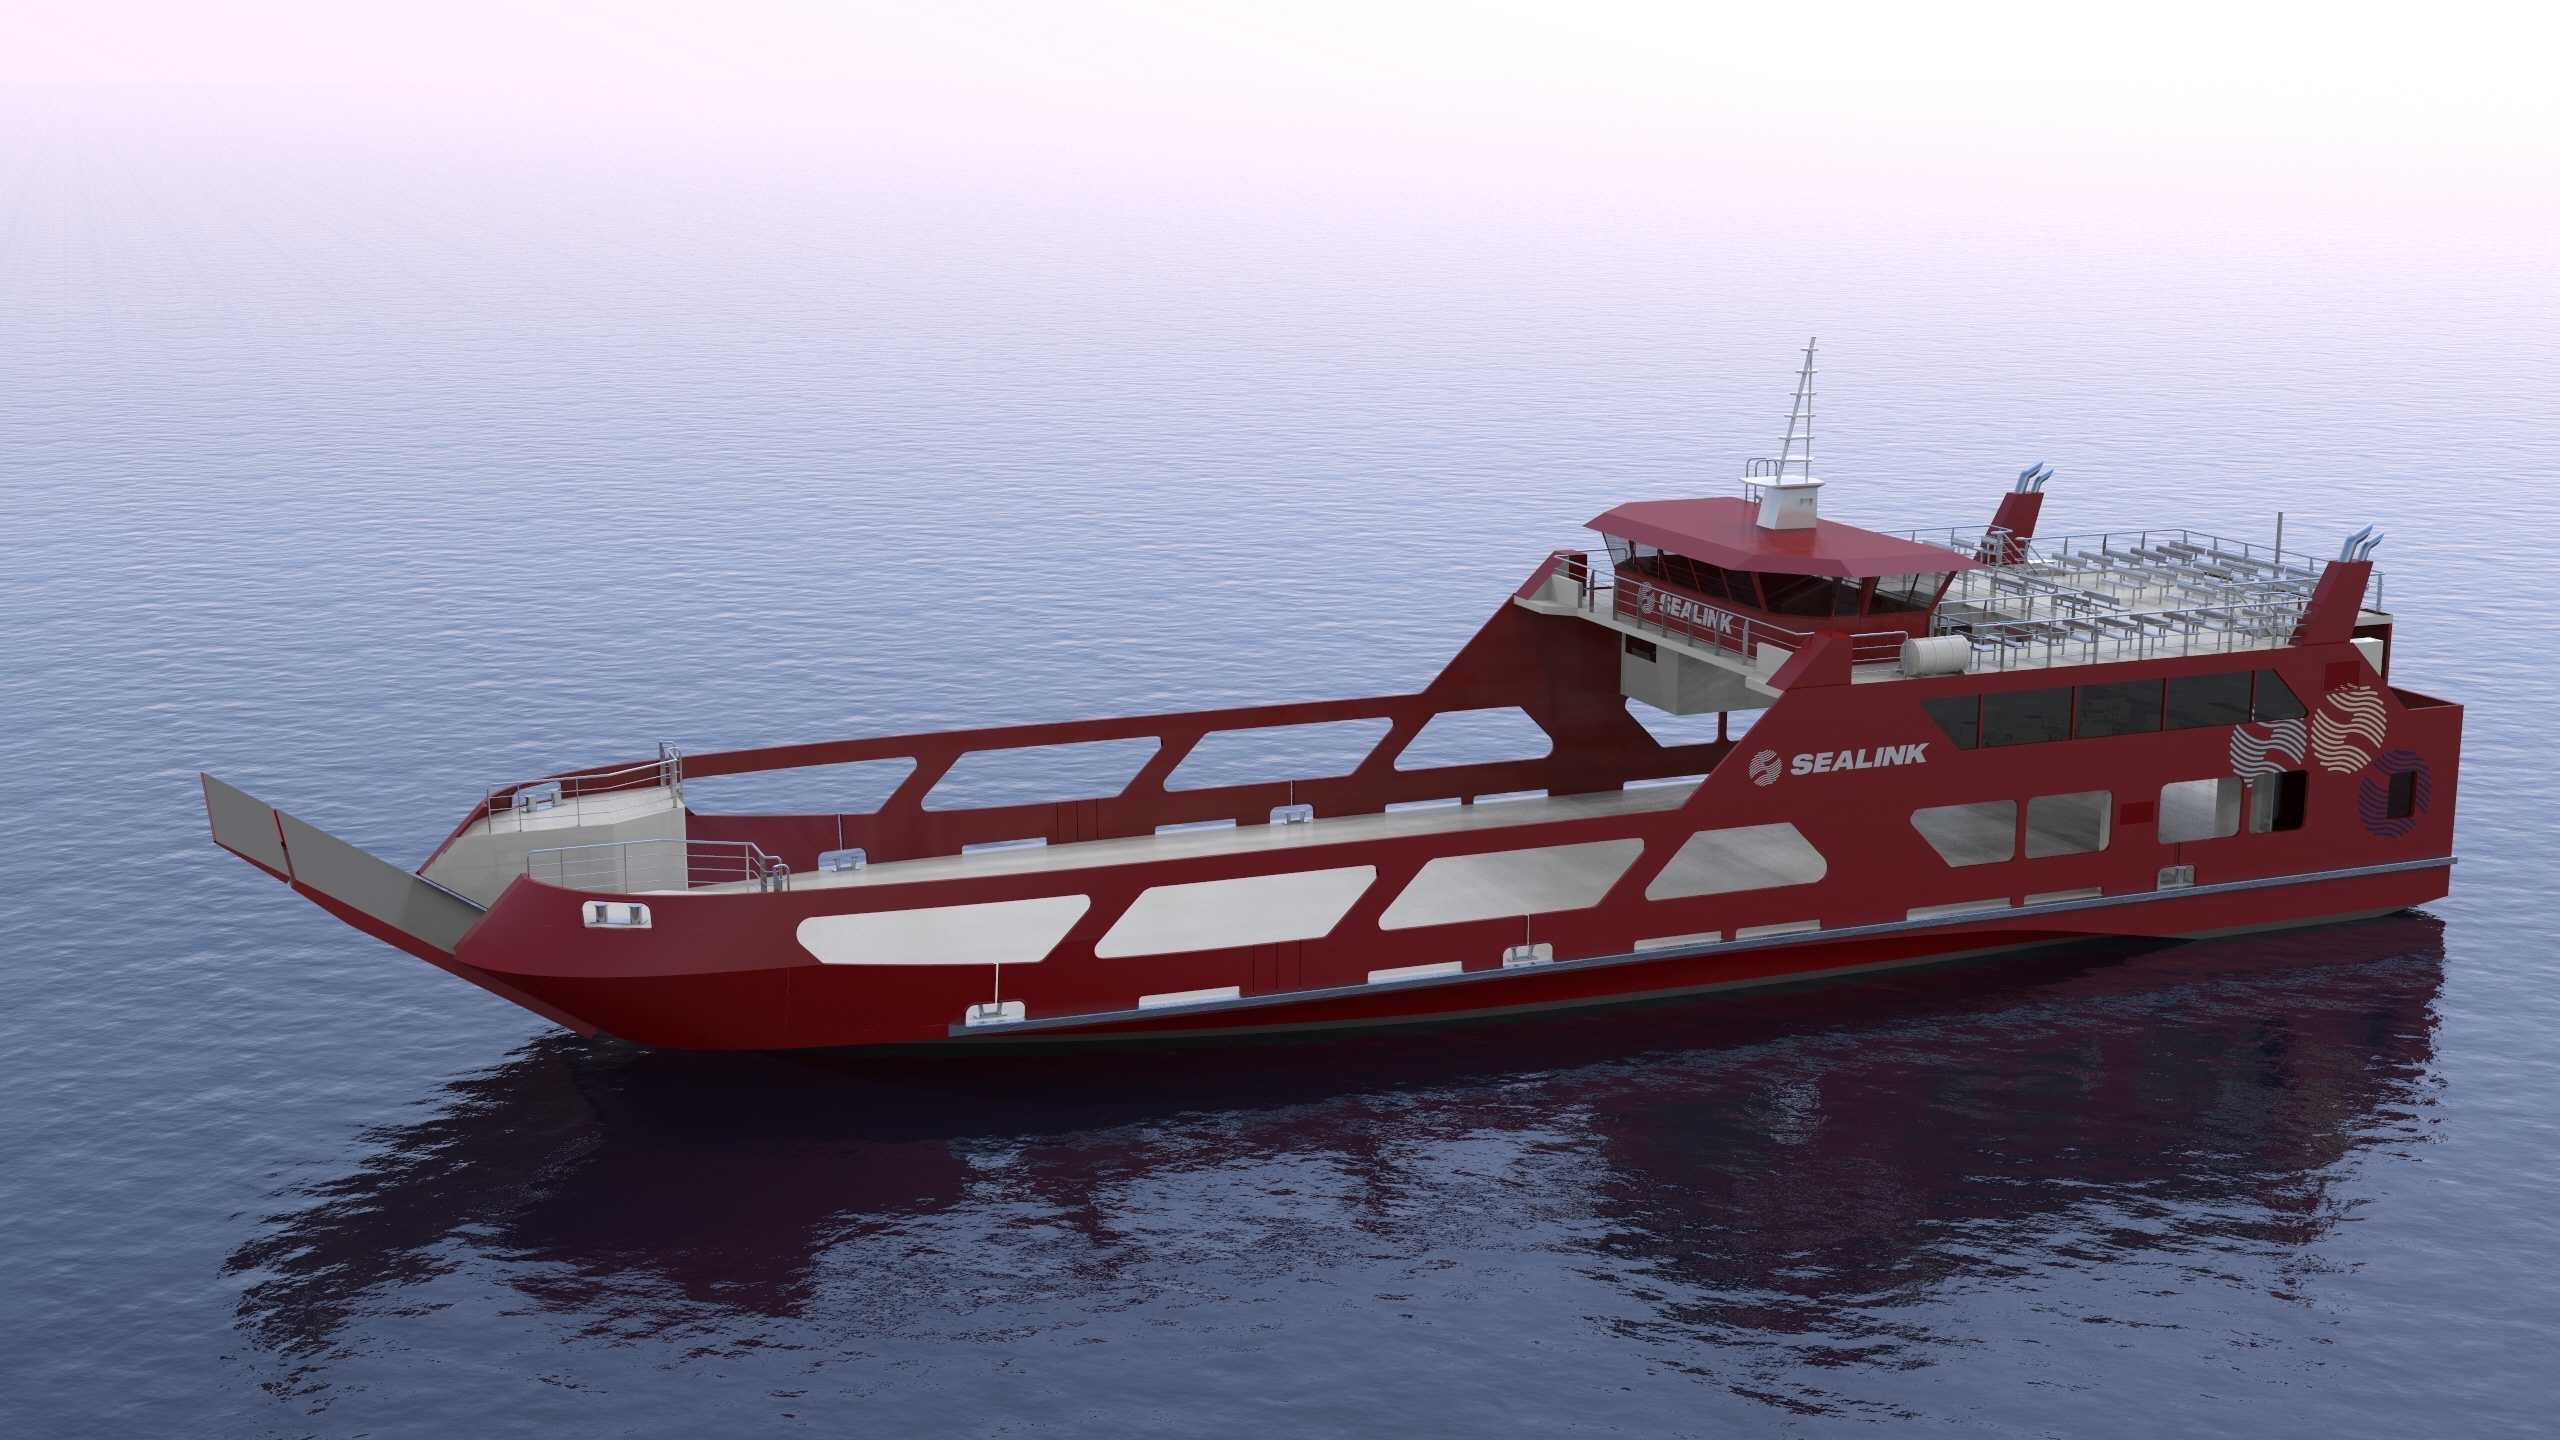 sealink ropax ferry render overall view port midship view